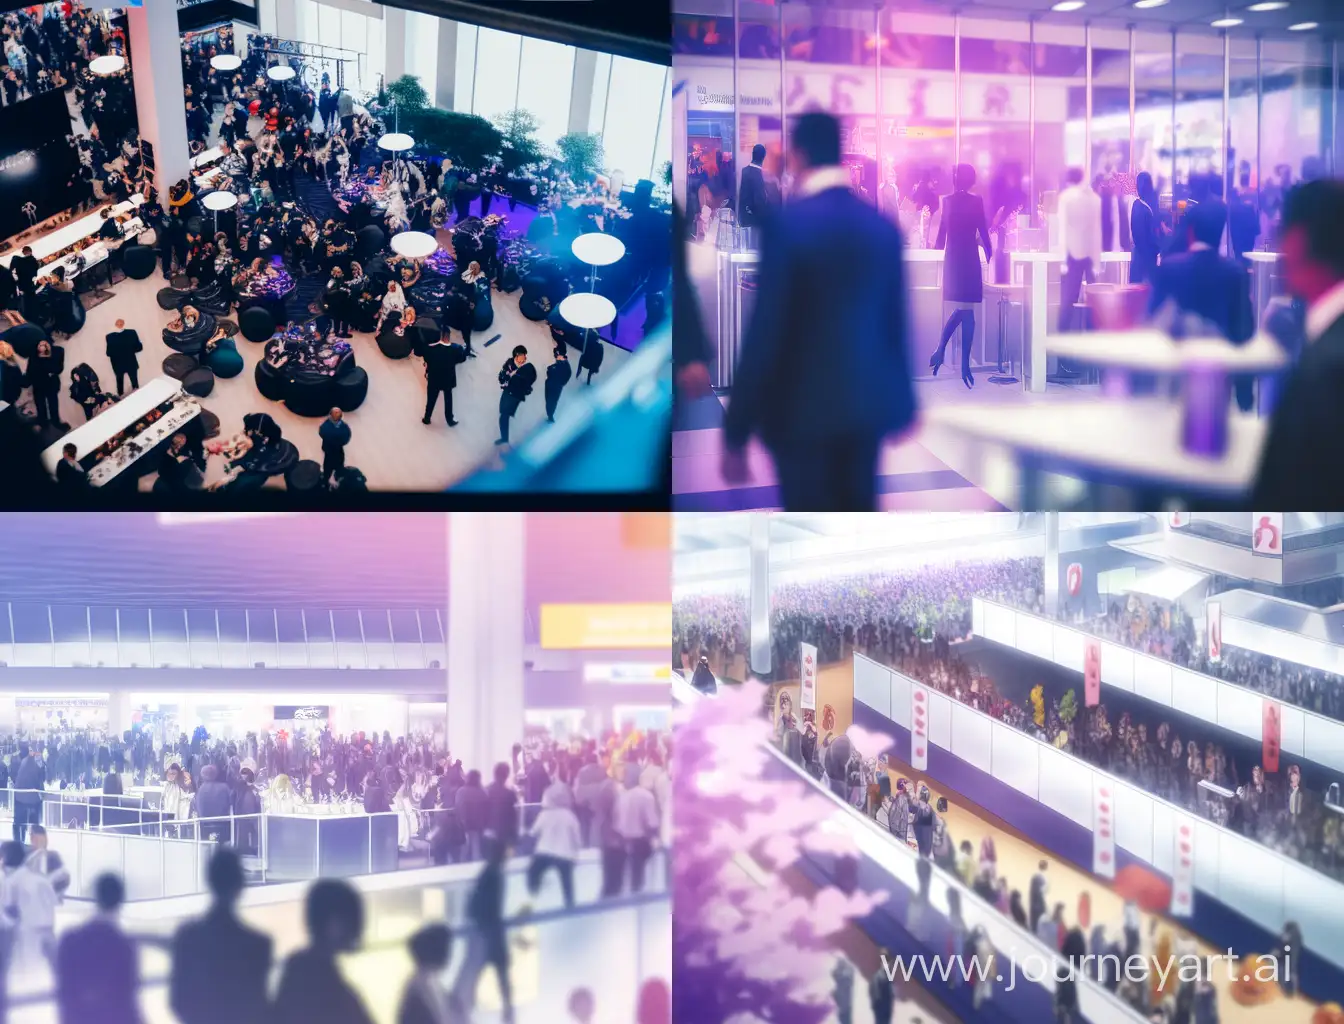 Dynamic-Business-Exhibition-Event-with-Crowded-Blurred-Background